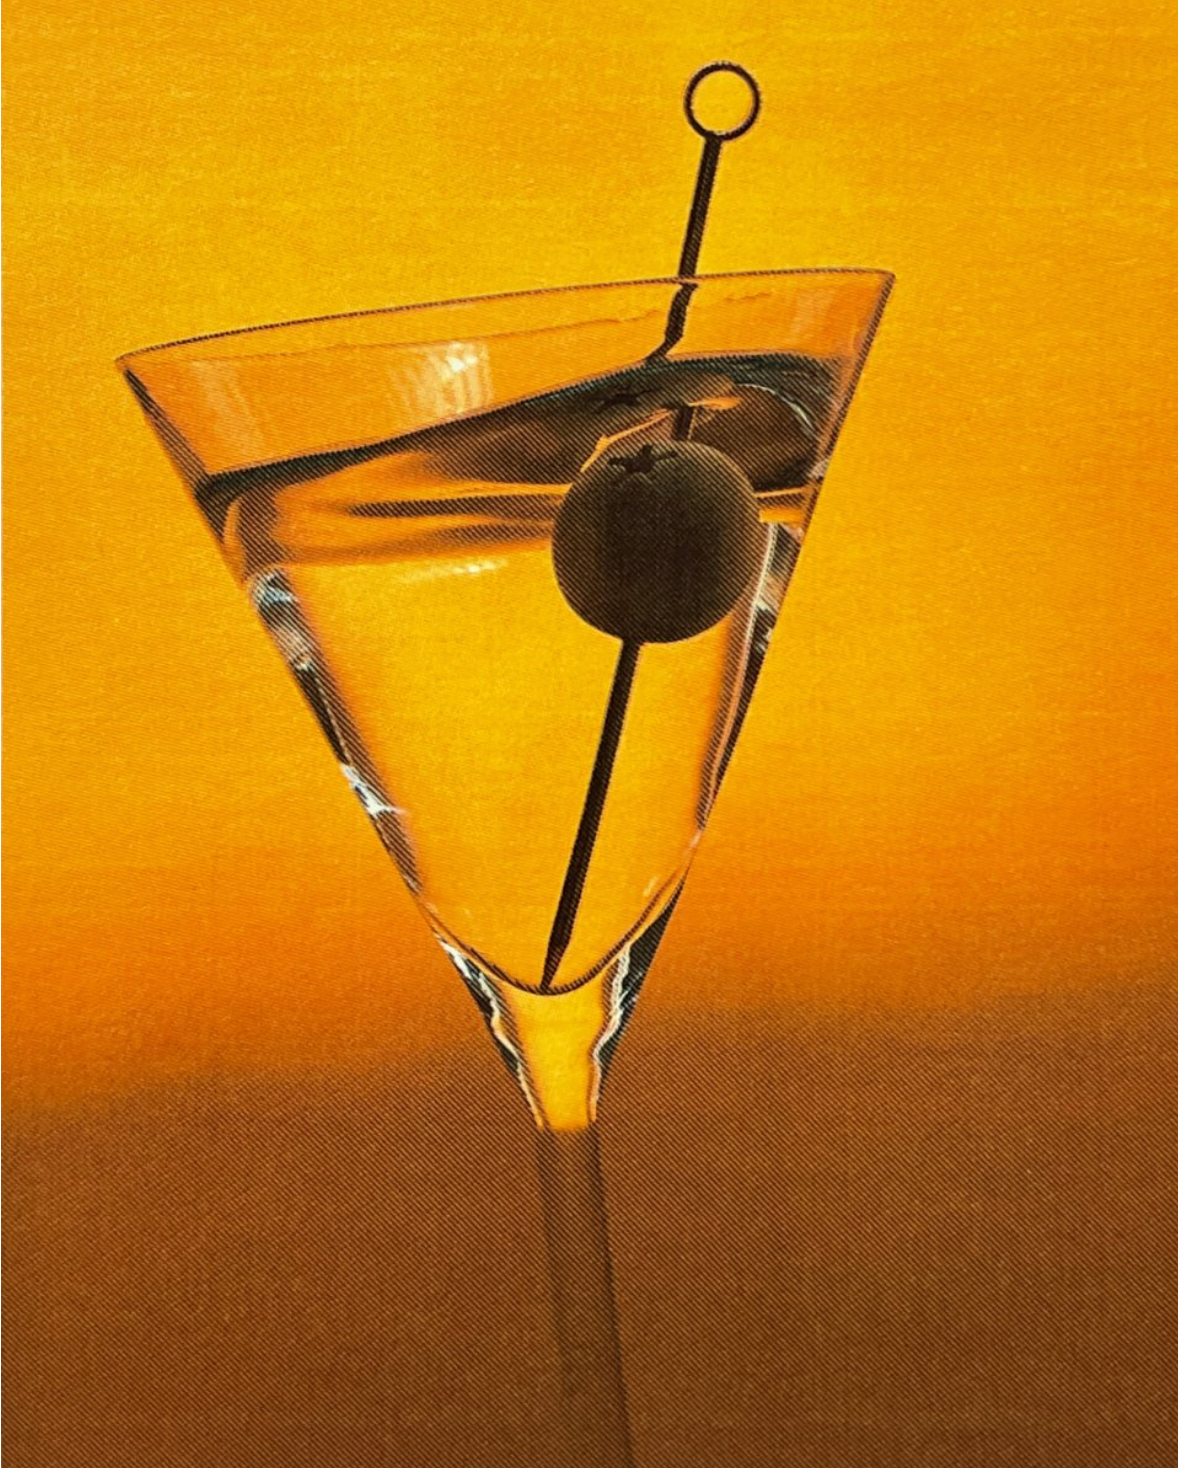 Leslie Kirchhoff's New Year's Eve Dirty Olive Martini